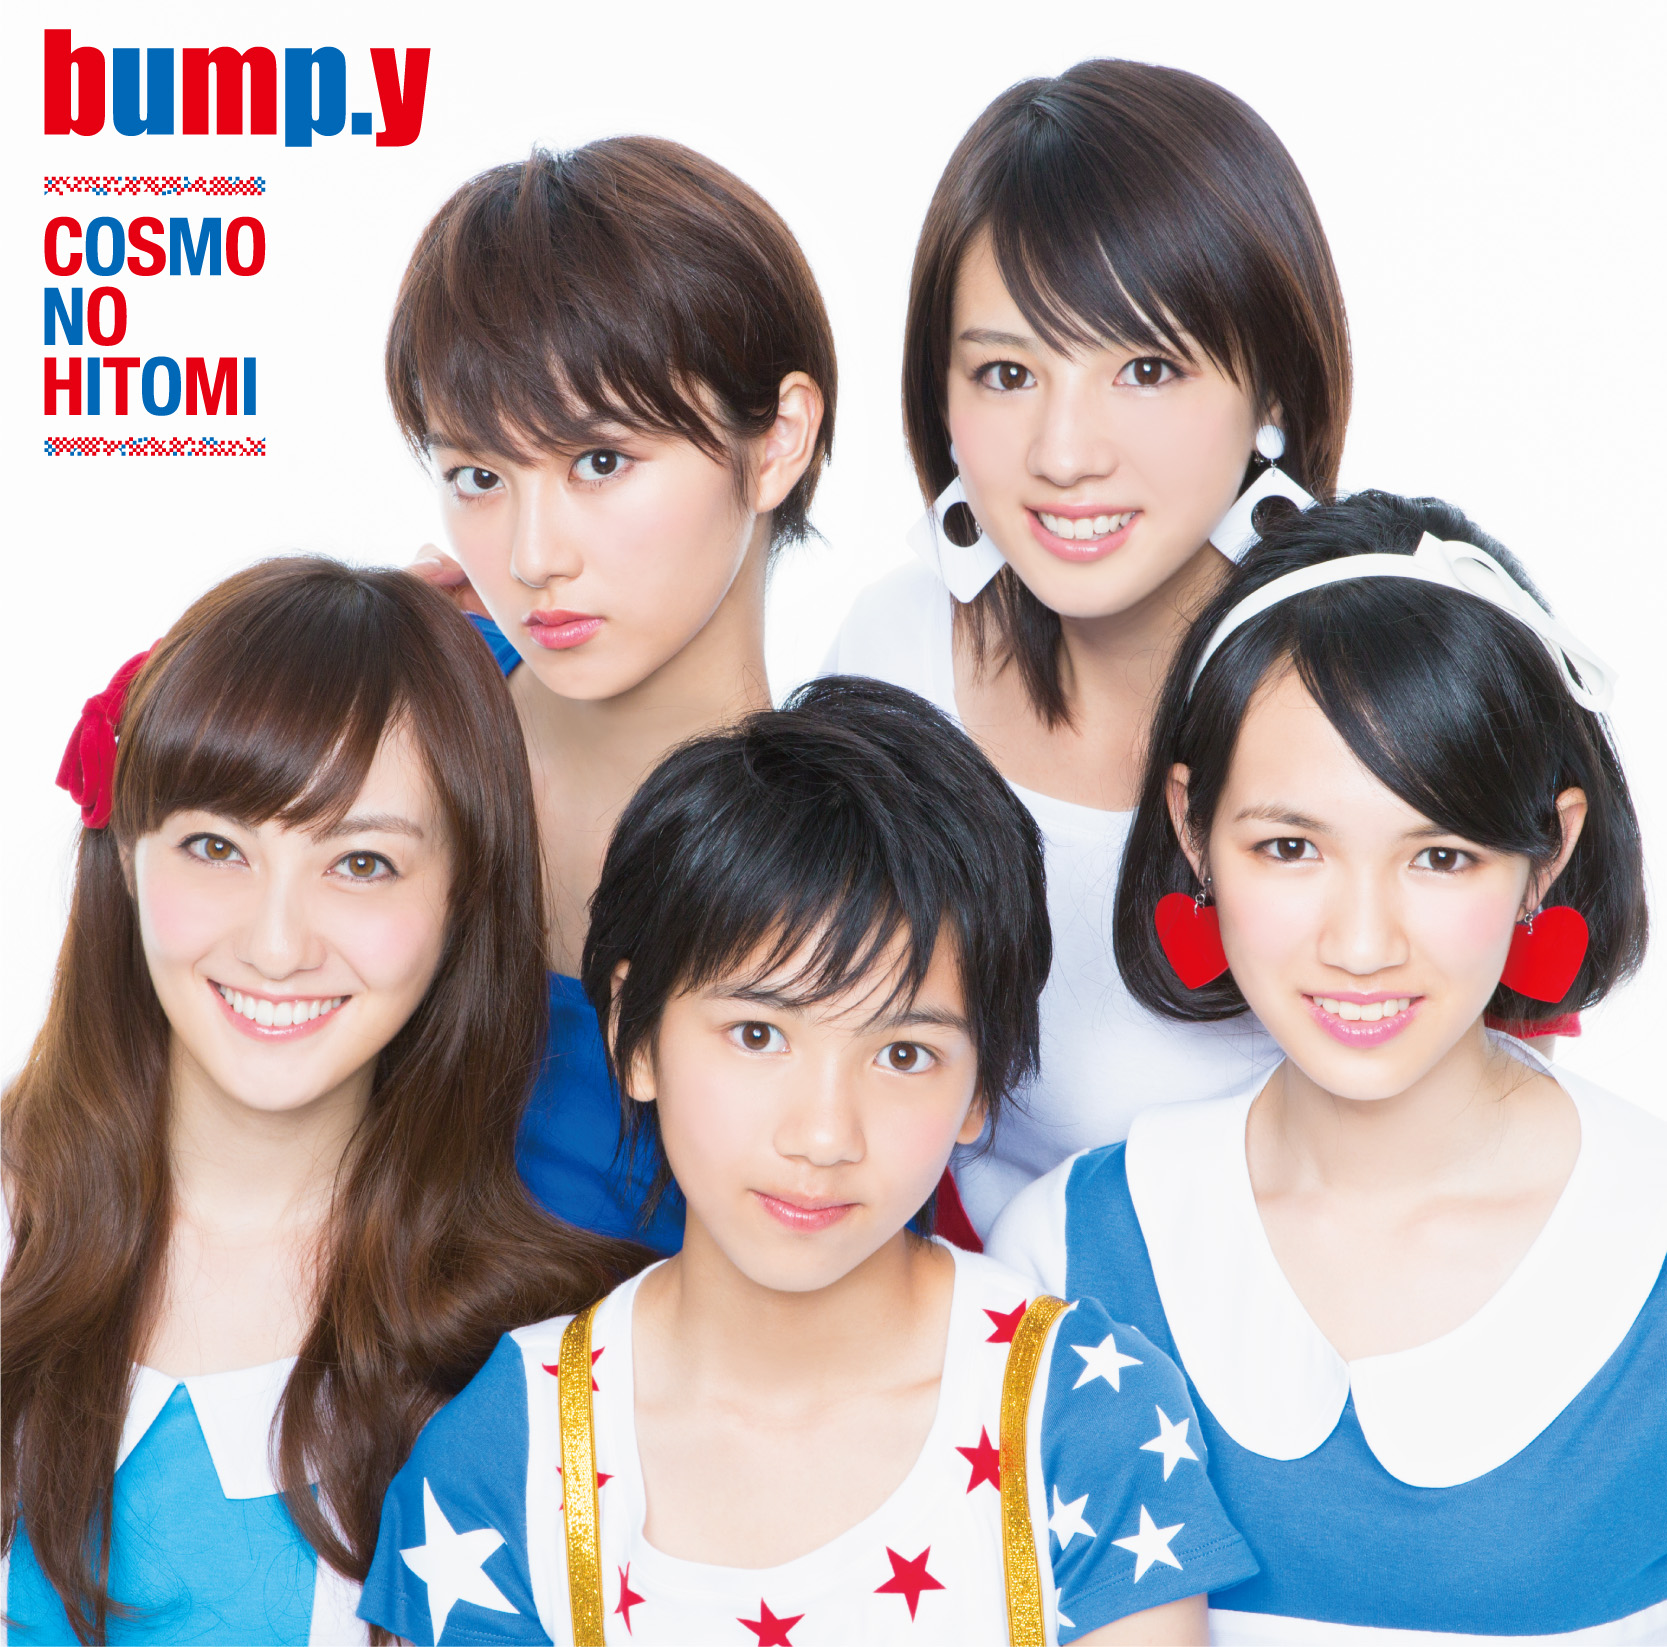 bump.y released the full MV for their new single ”Cosmo no Hitomi” !